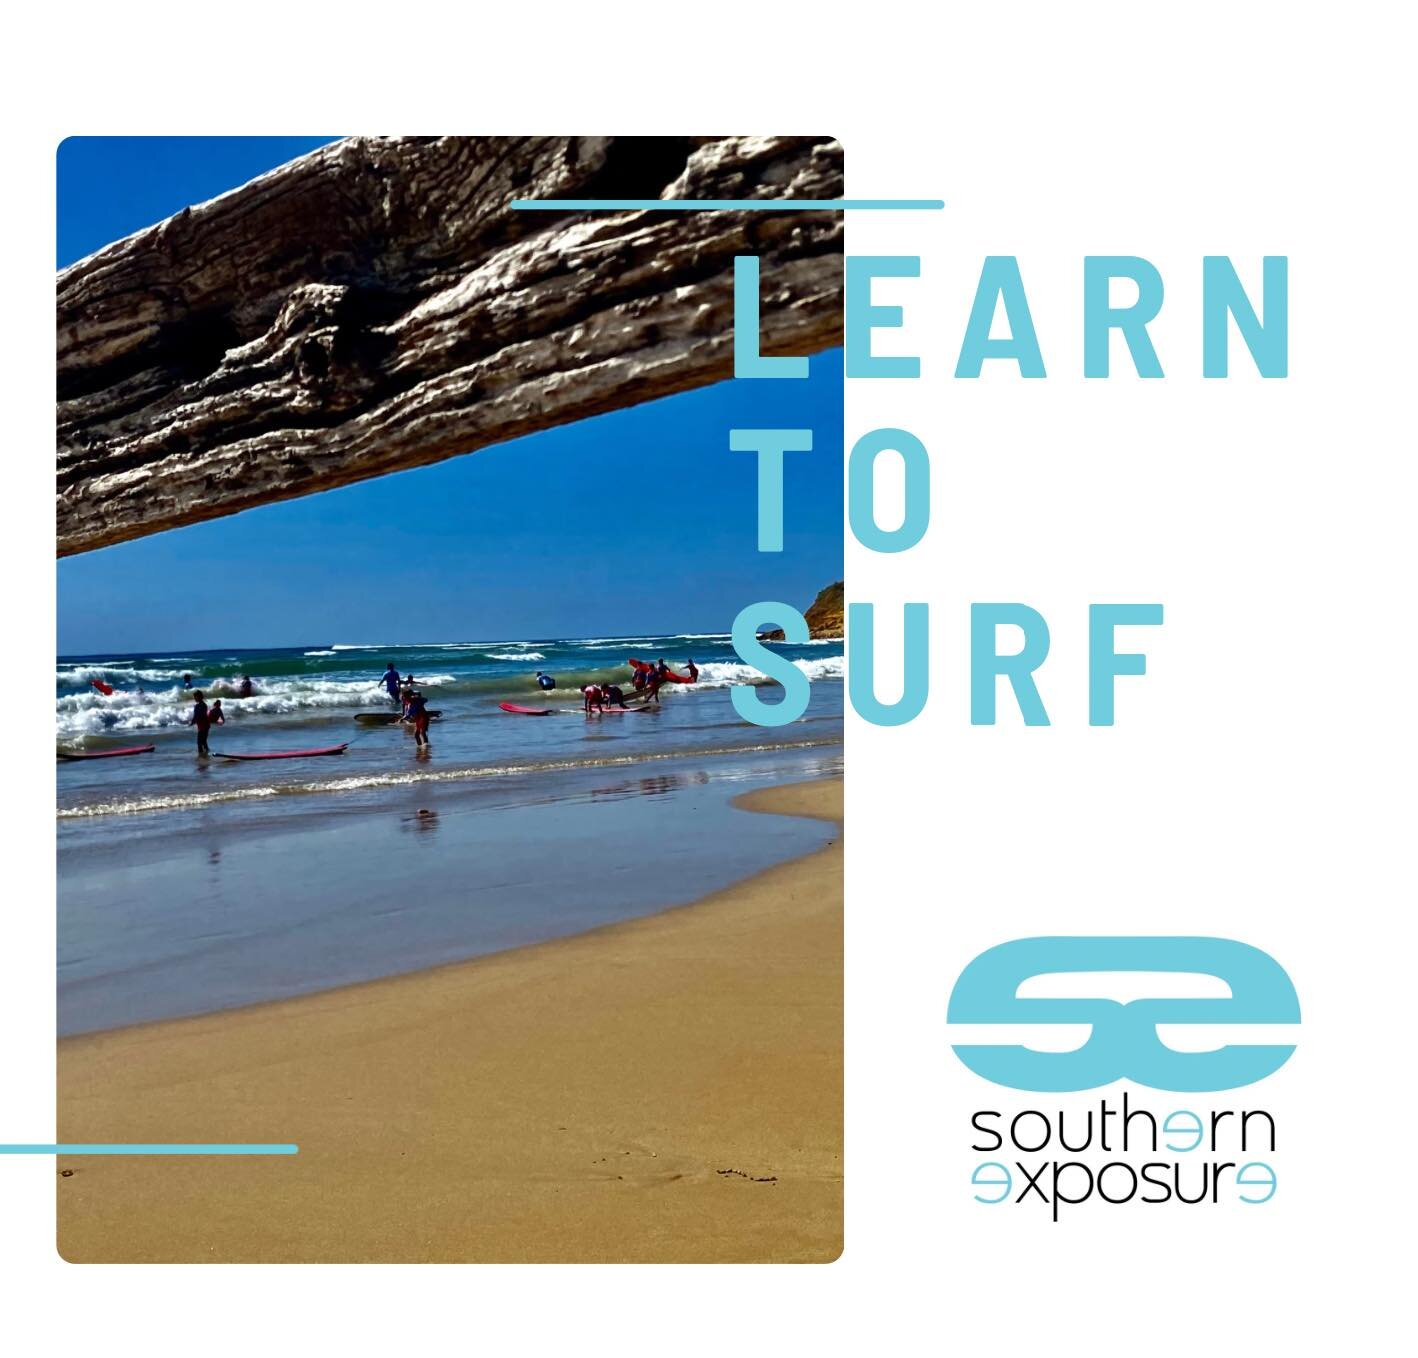 SUMMER SURF | Learn to Surf 

Check out our new DAILY SURF CLASSES along the Surf Coast and Great Ocean Road 
Options include:
- board and wetsuit hire
- expert coaching 
- ocean safety and awareness skills
- on land step by step run step
- on the wa